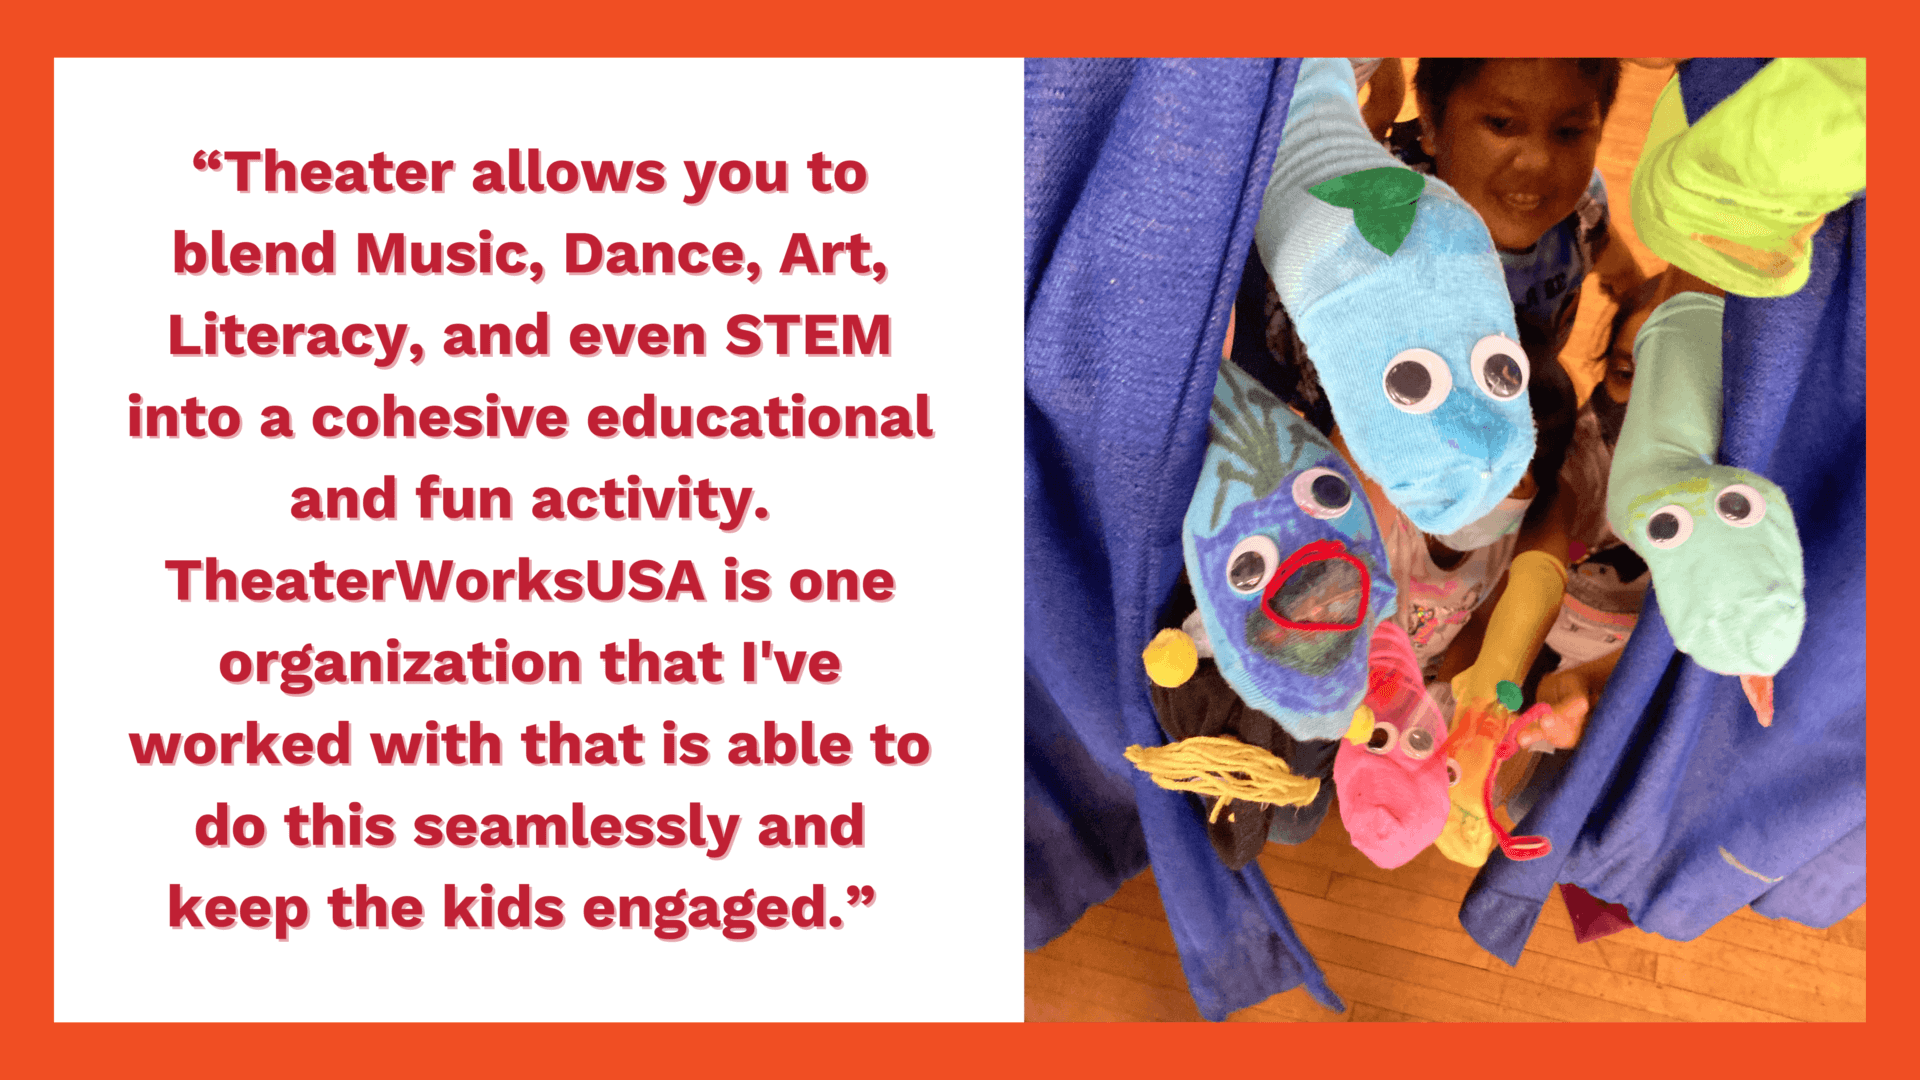 "Theater allows you to blend Music, Dance, Art, Literacy, and even STEM into a cohesive educational and fun activity. TheaterWorksUSA is one organization that I've worked with that is able to do this seamlessly and keep the kids engaged."